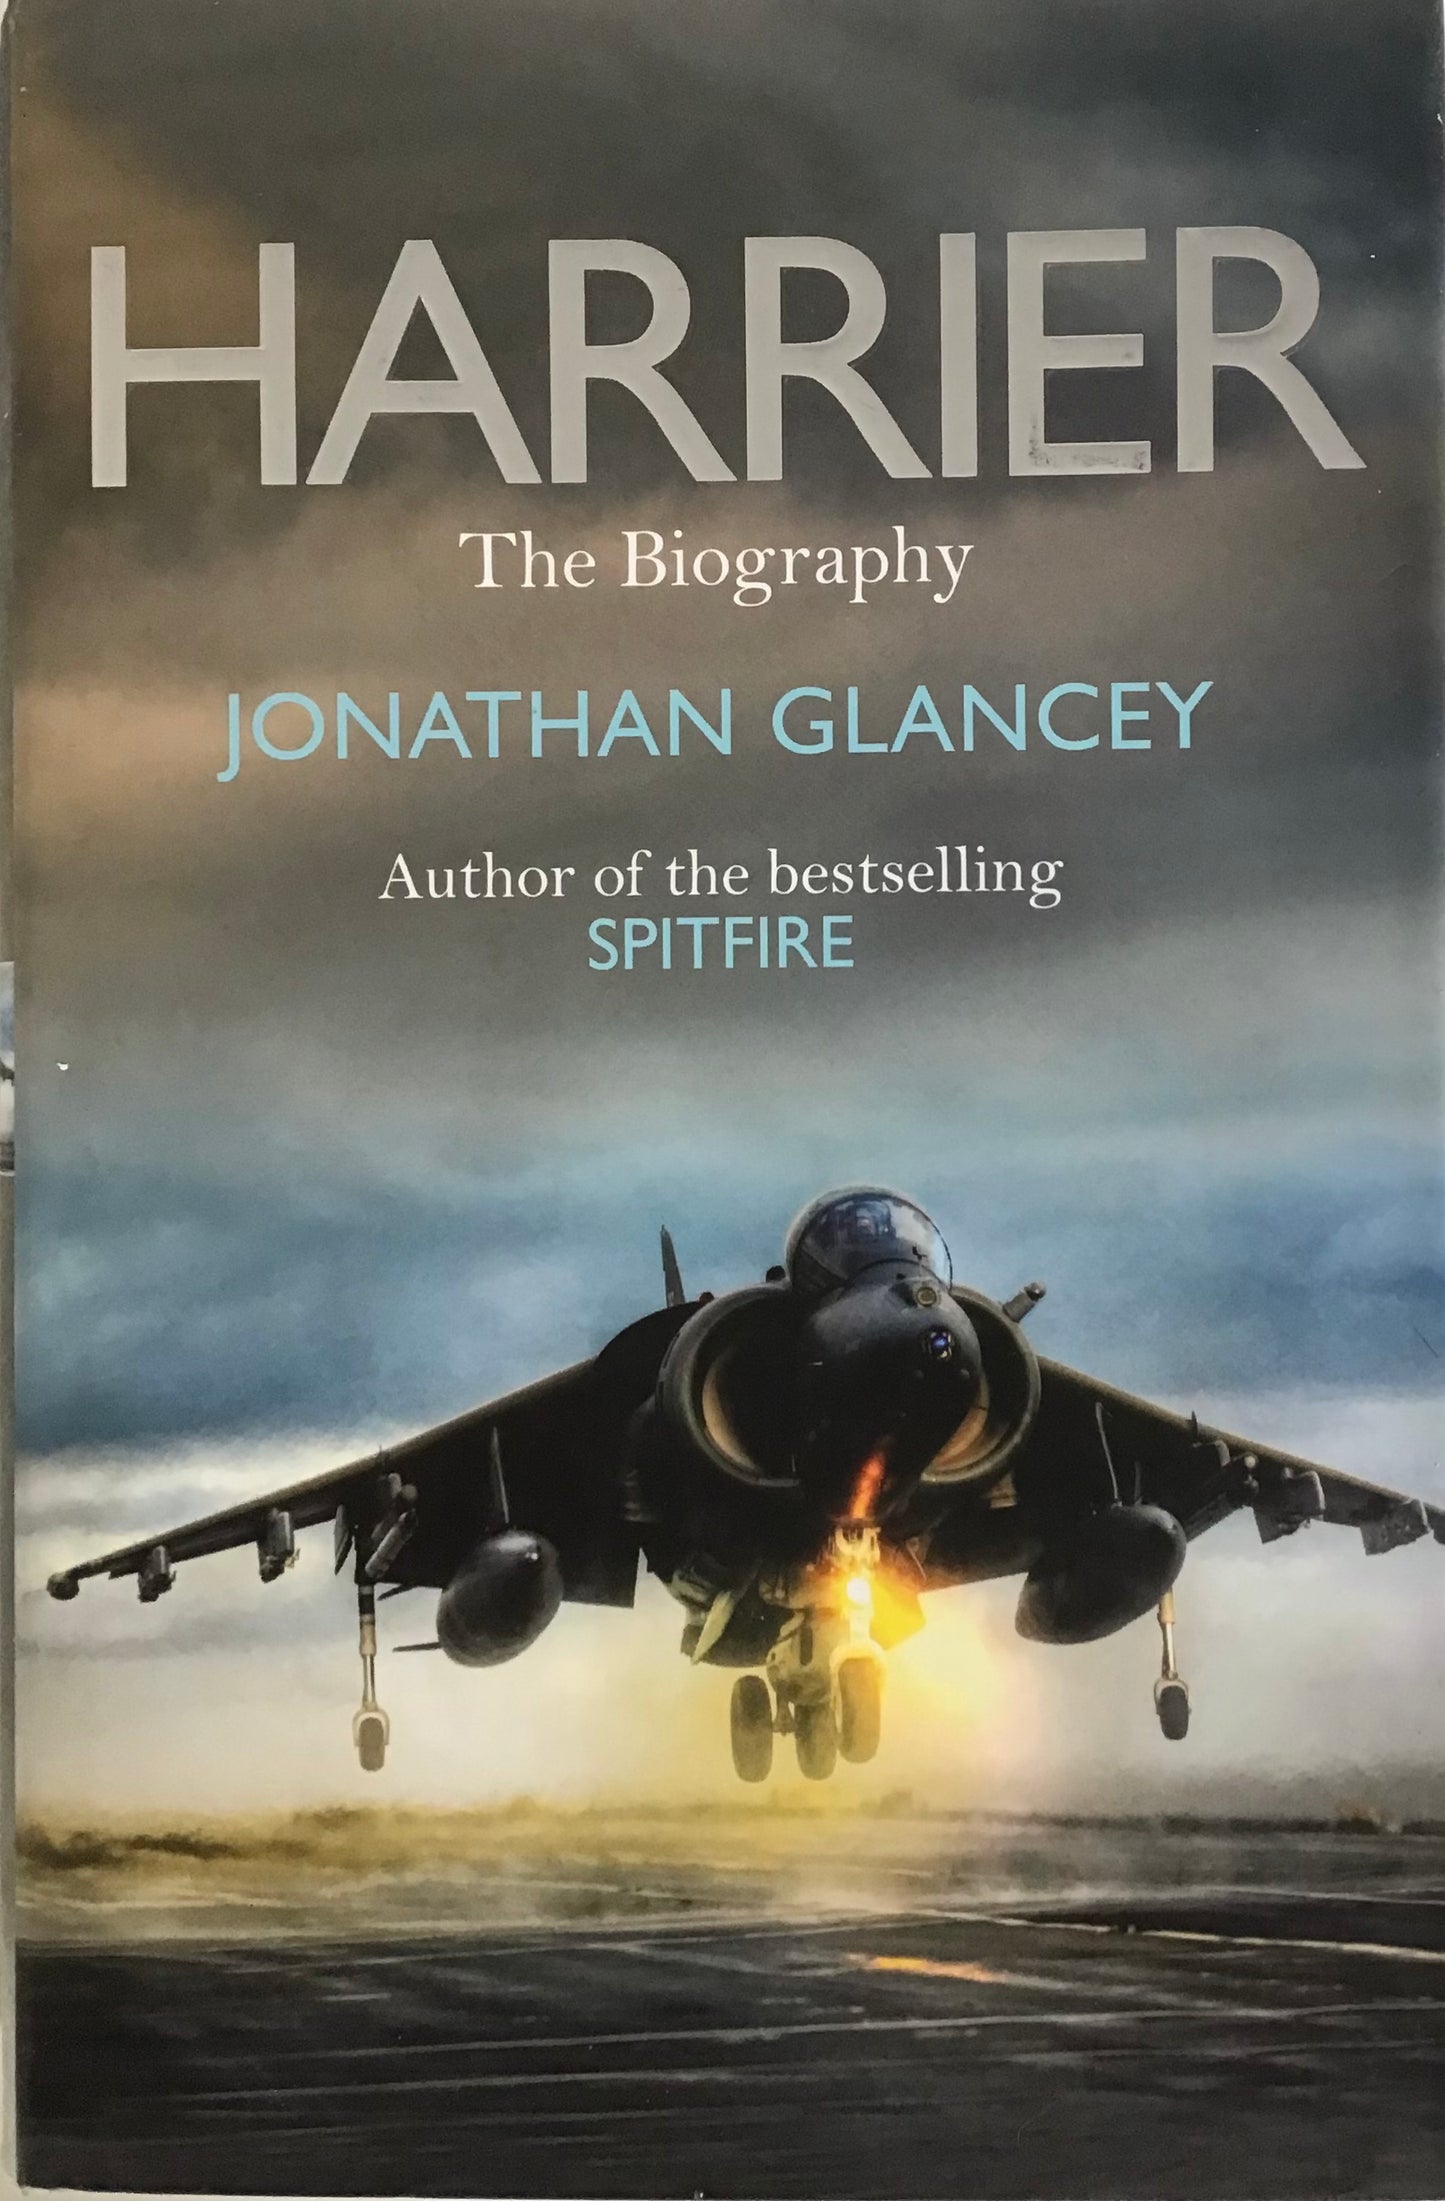 Harrier the biography - Johnathan Glancy - Chester Model Centre